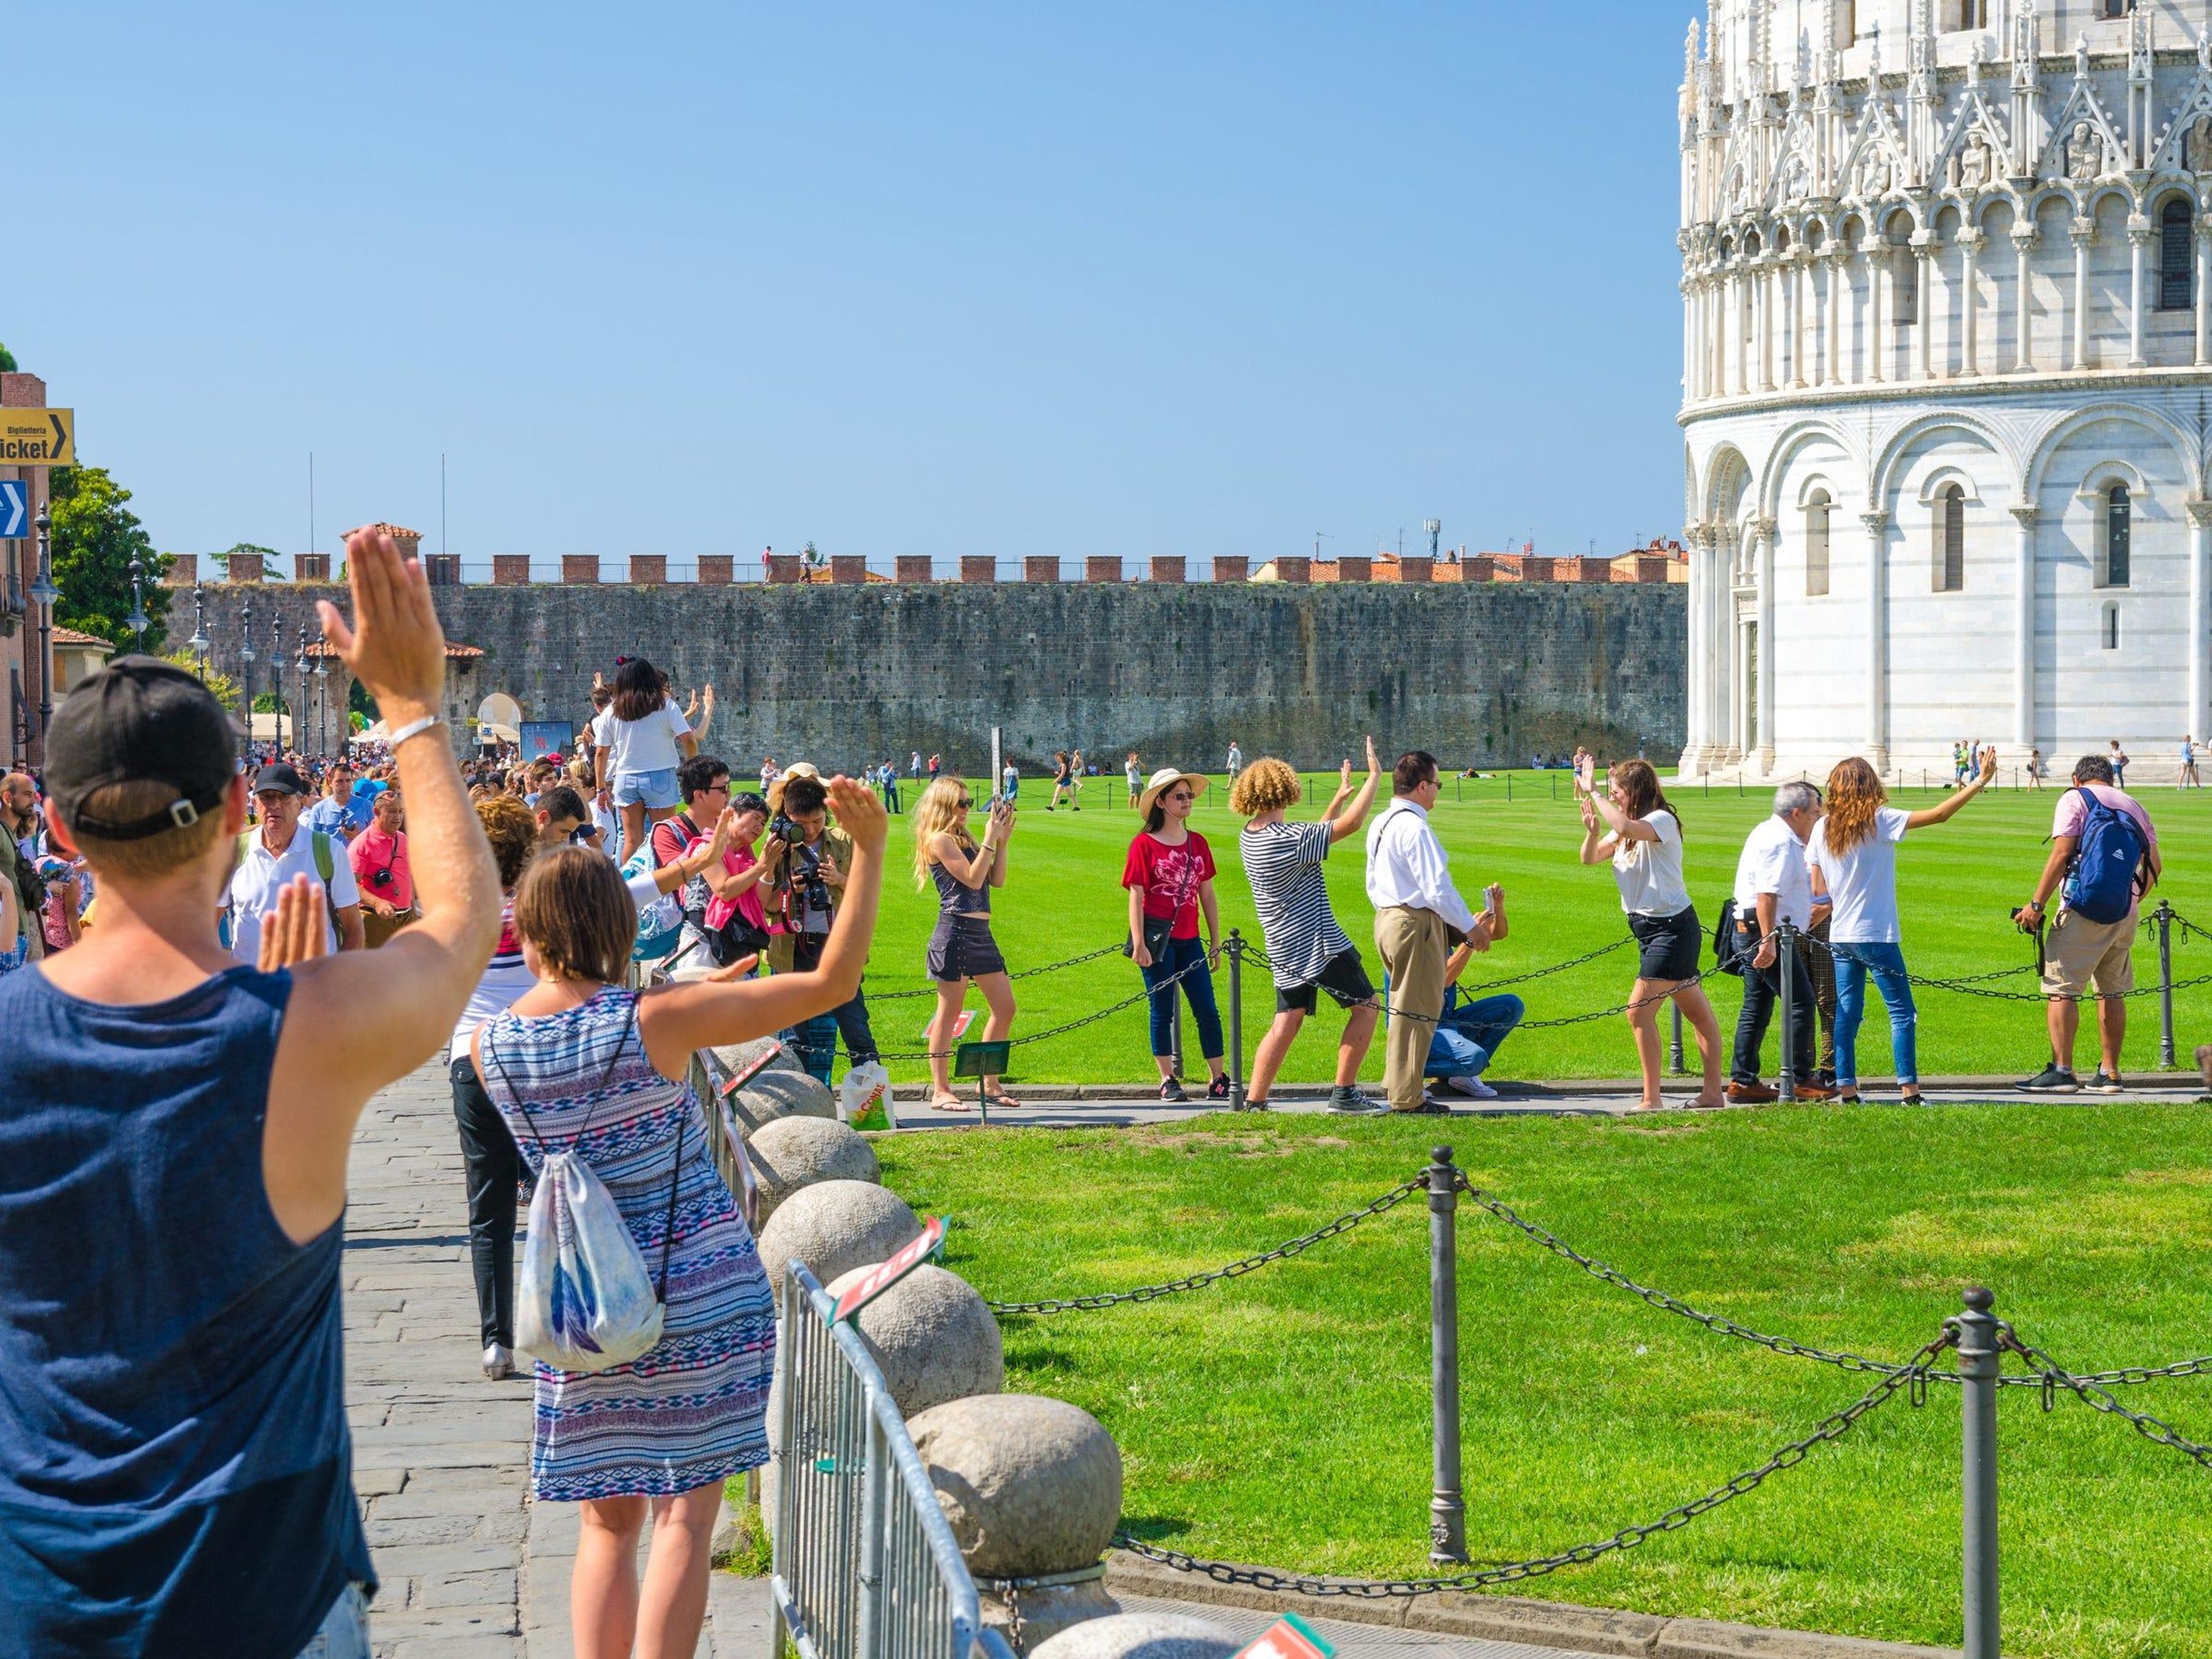 BEFORE: The Leaning Tower of Pisa in Italy attracts throngs of tourists pretending to hold it up.